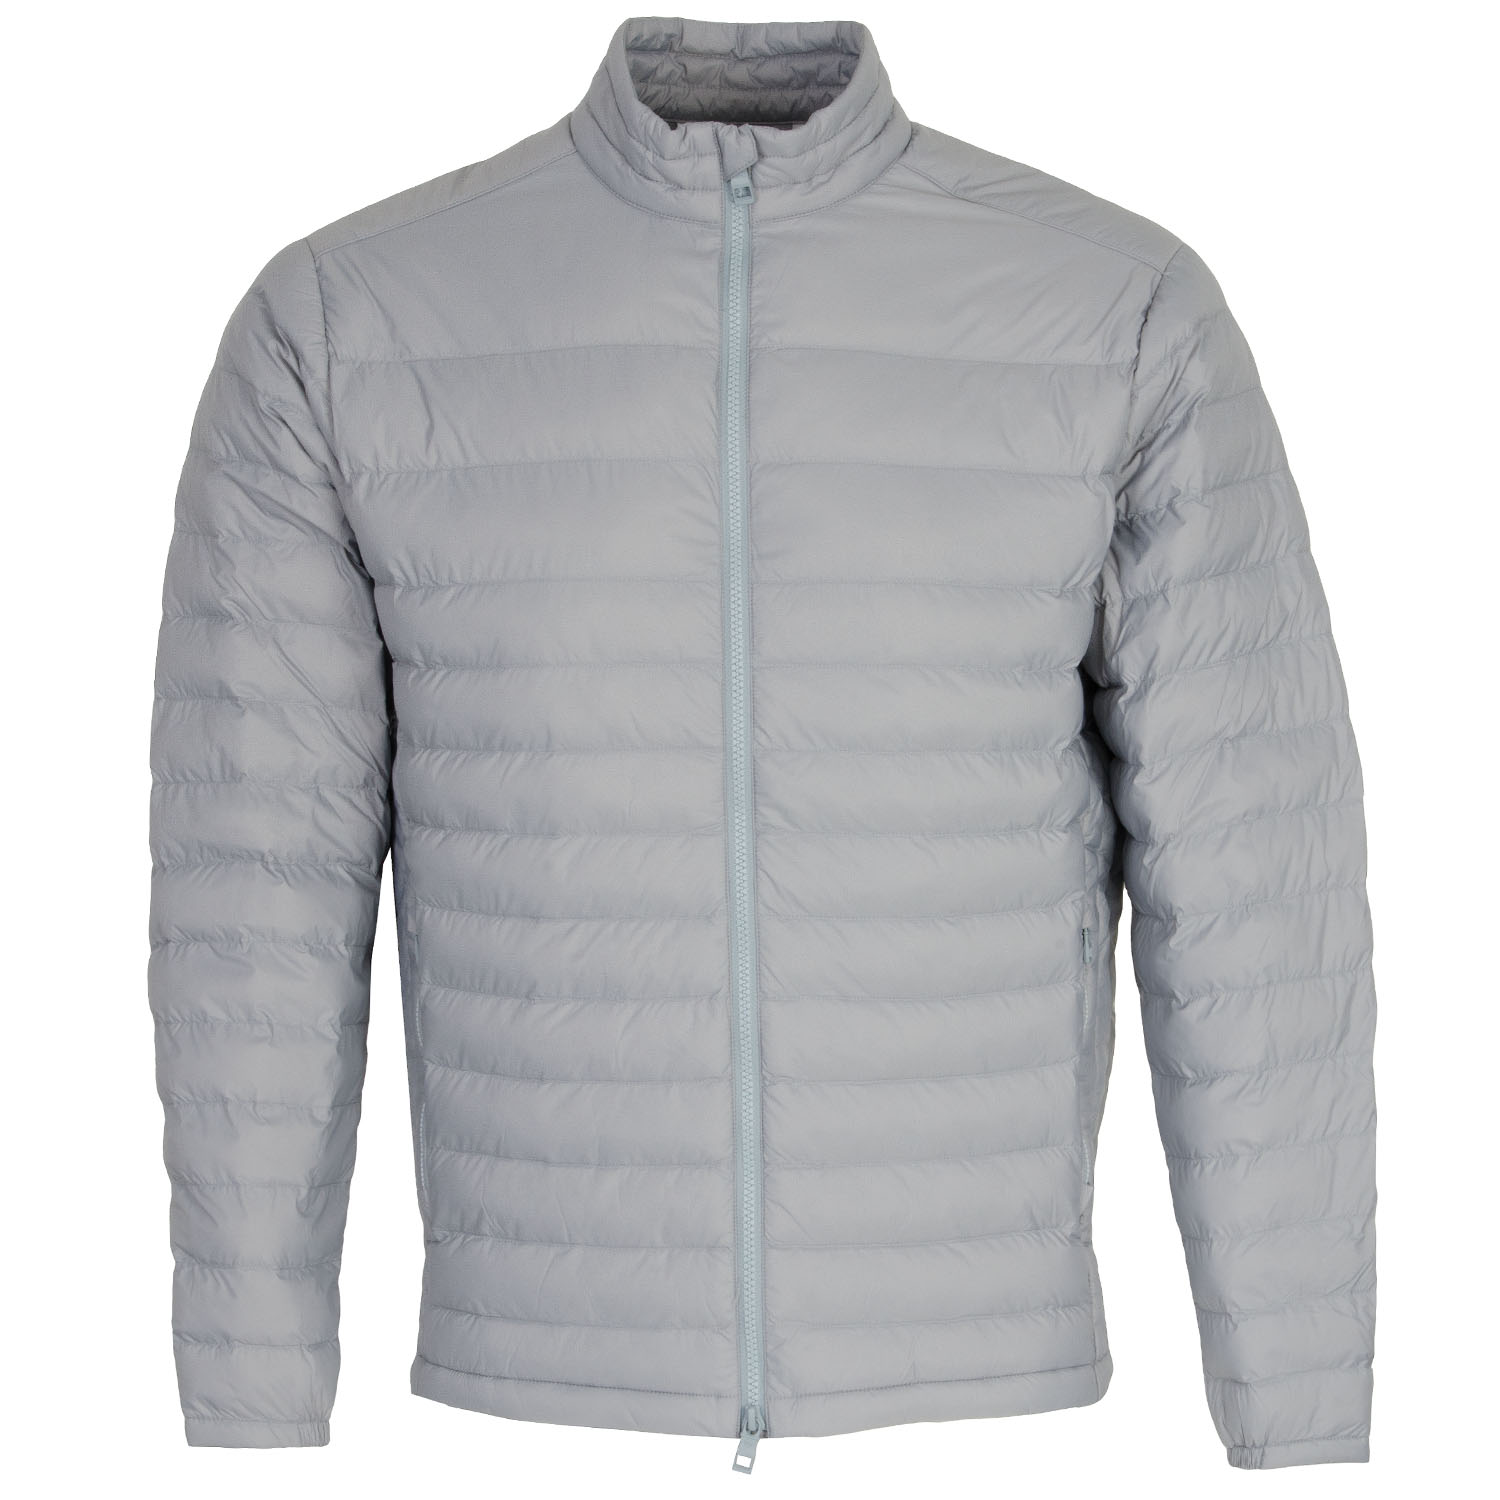 Peter Millar All Course Jacket